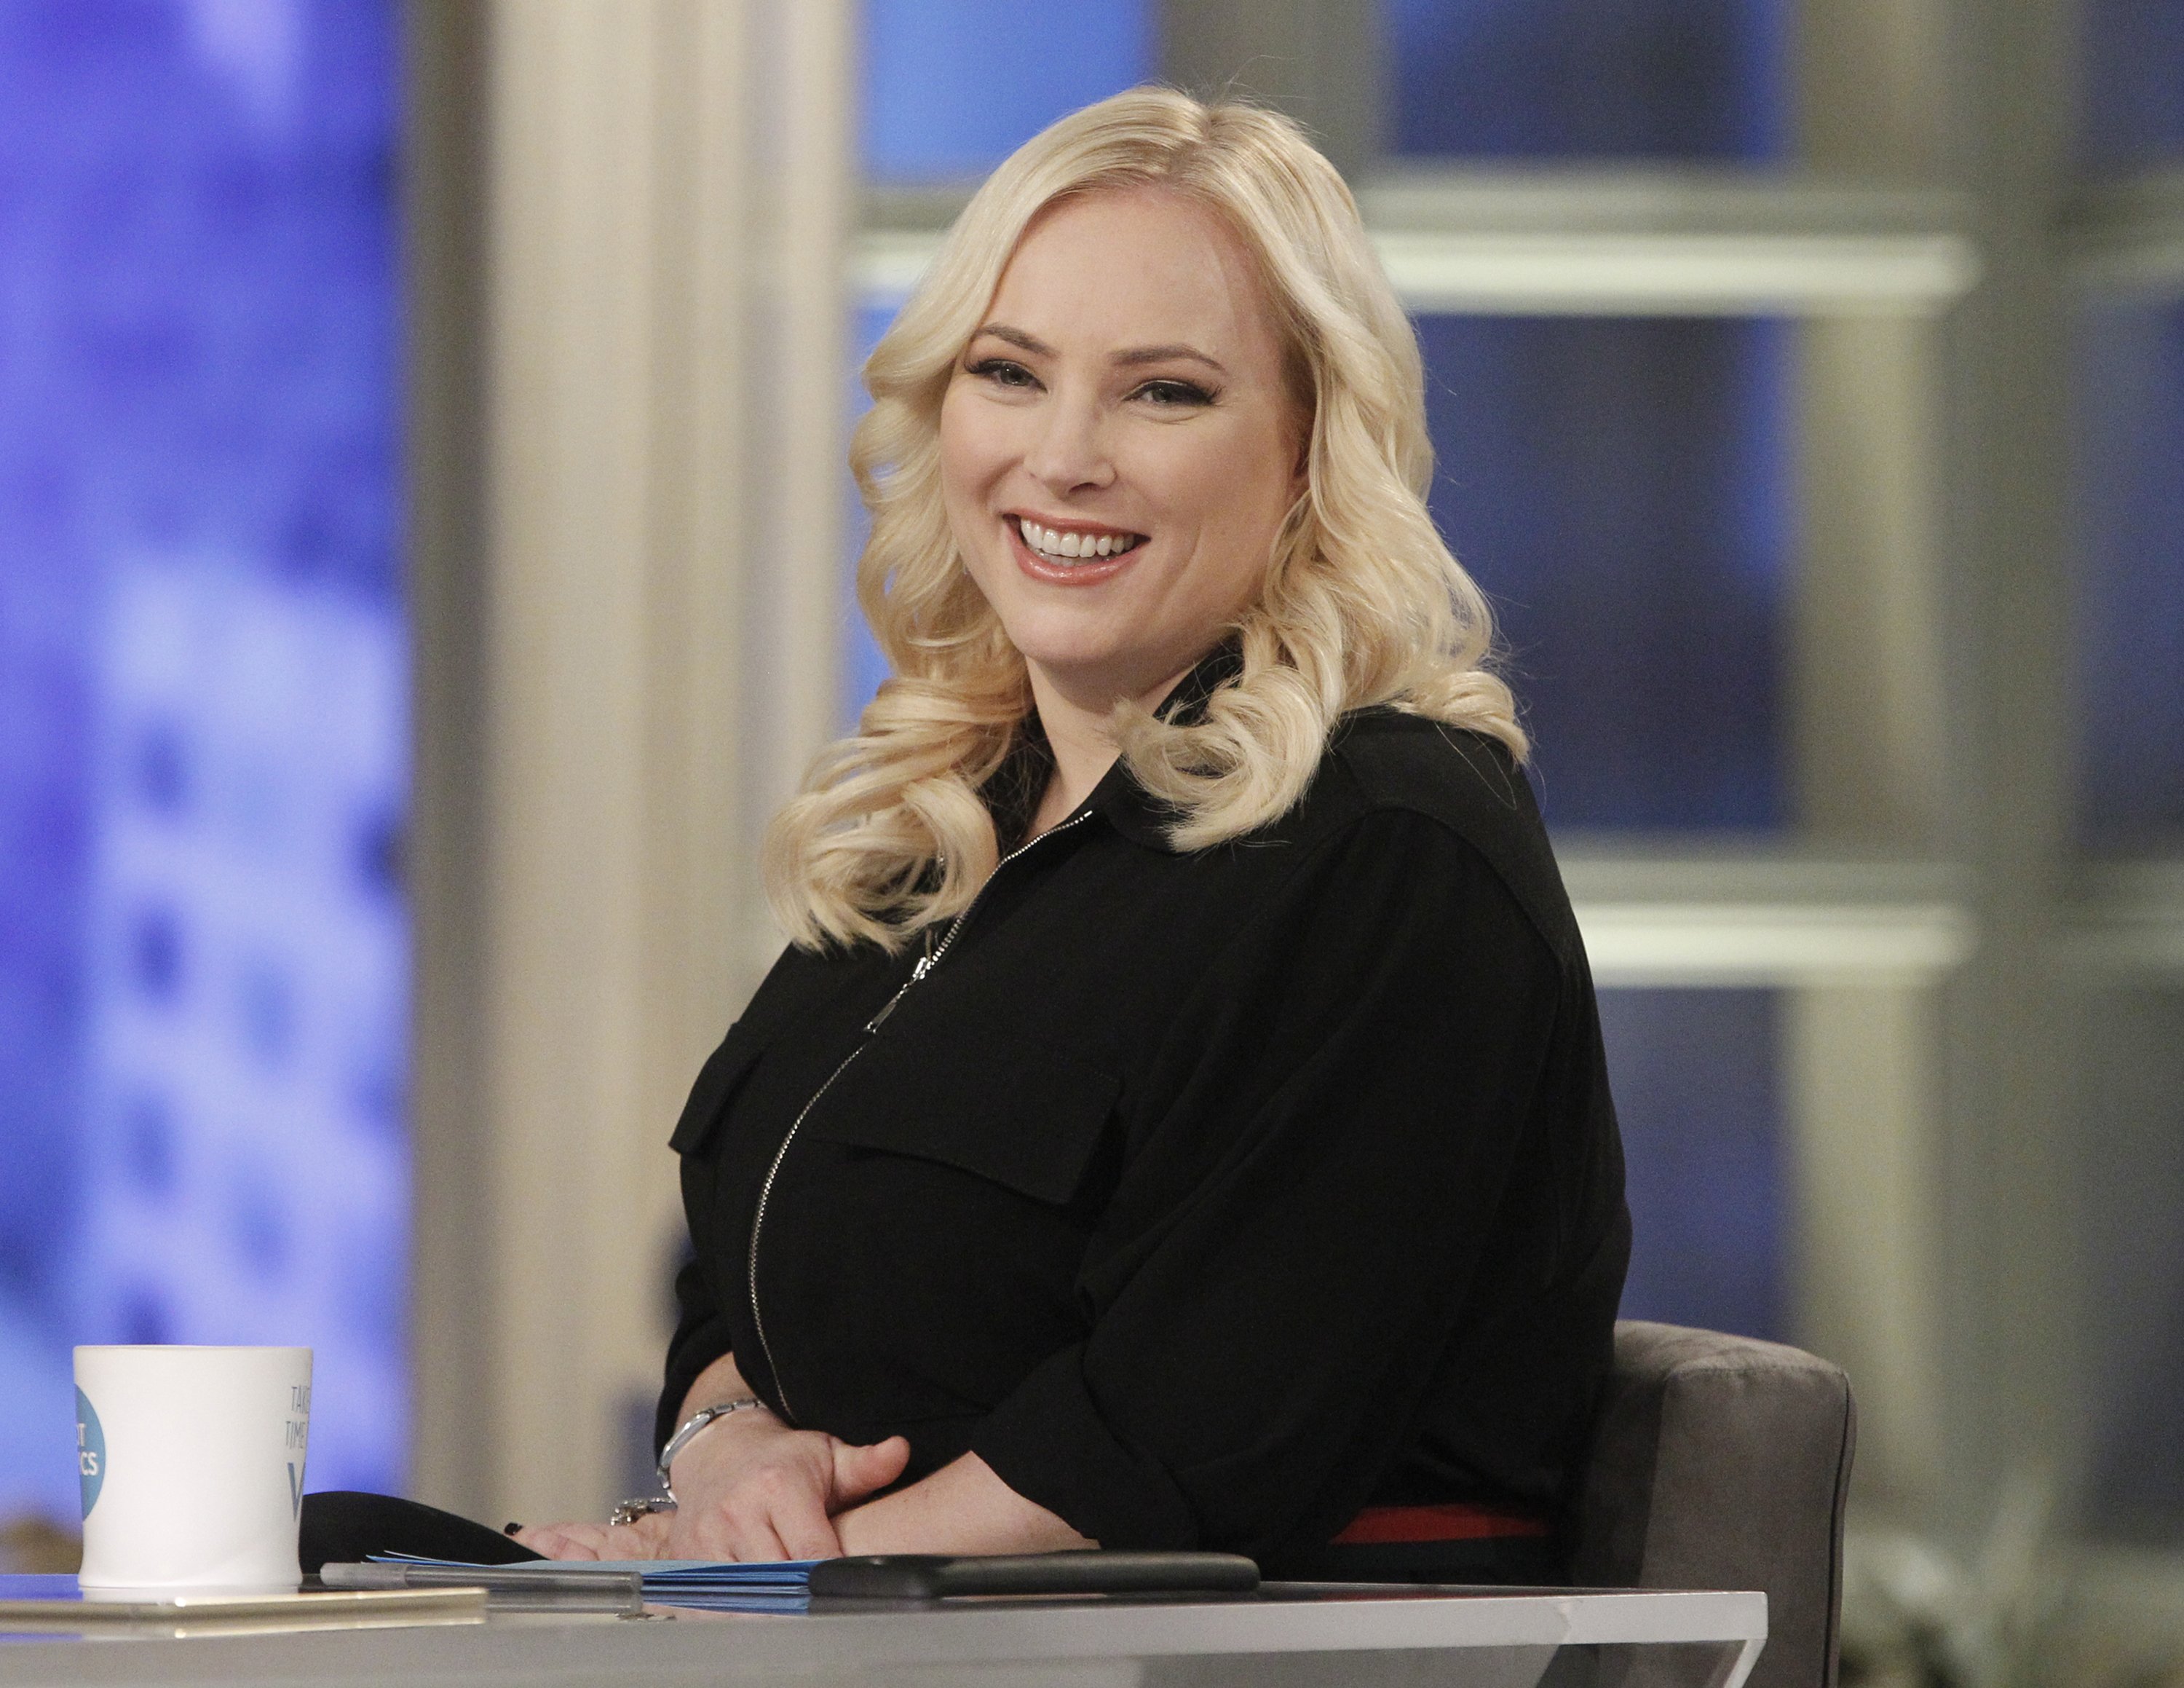 TV show host Meghan McCain during the set of ABC's "The View" Season 21 on February 6, 2018 in New York | Photo: Getty Images